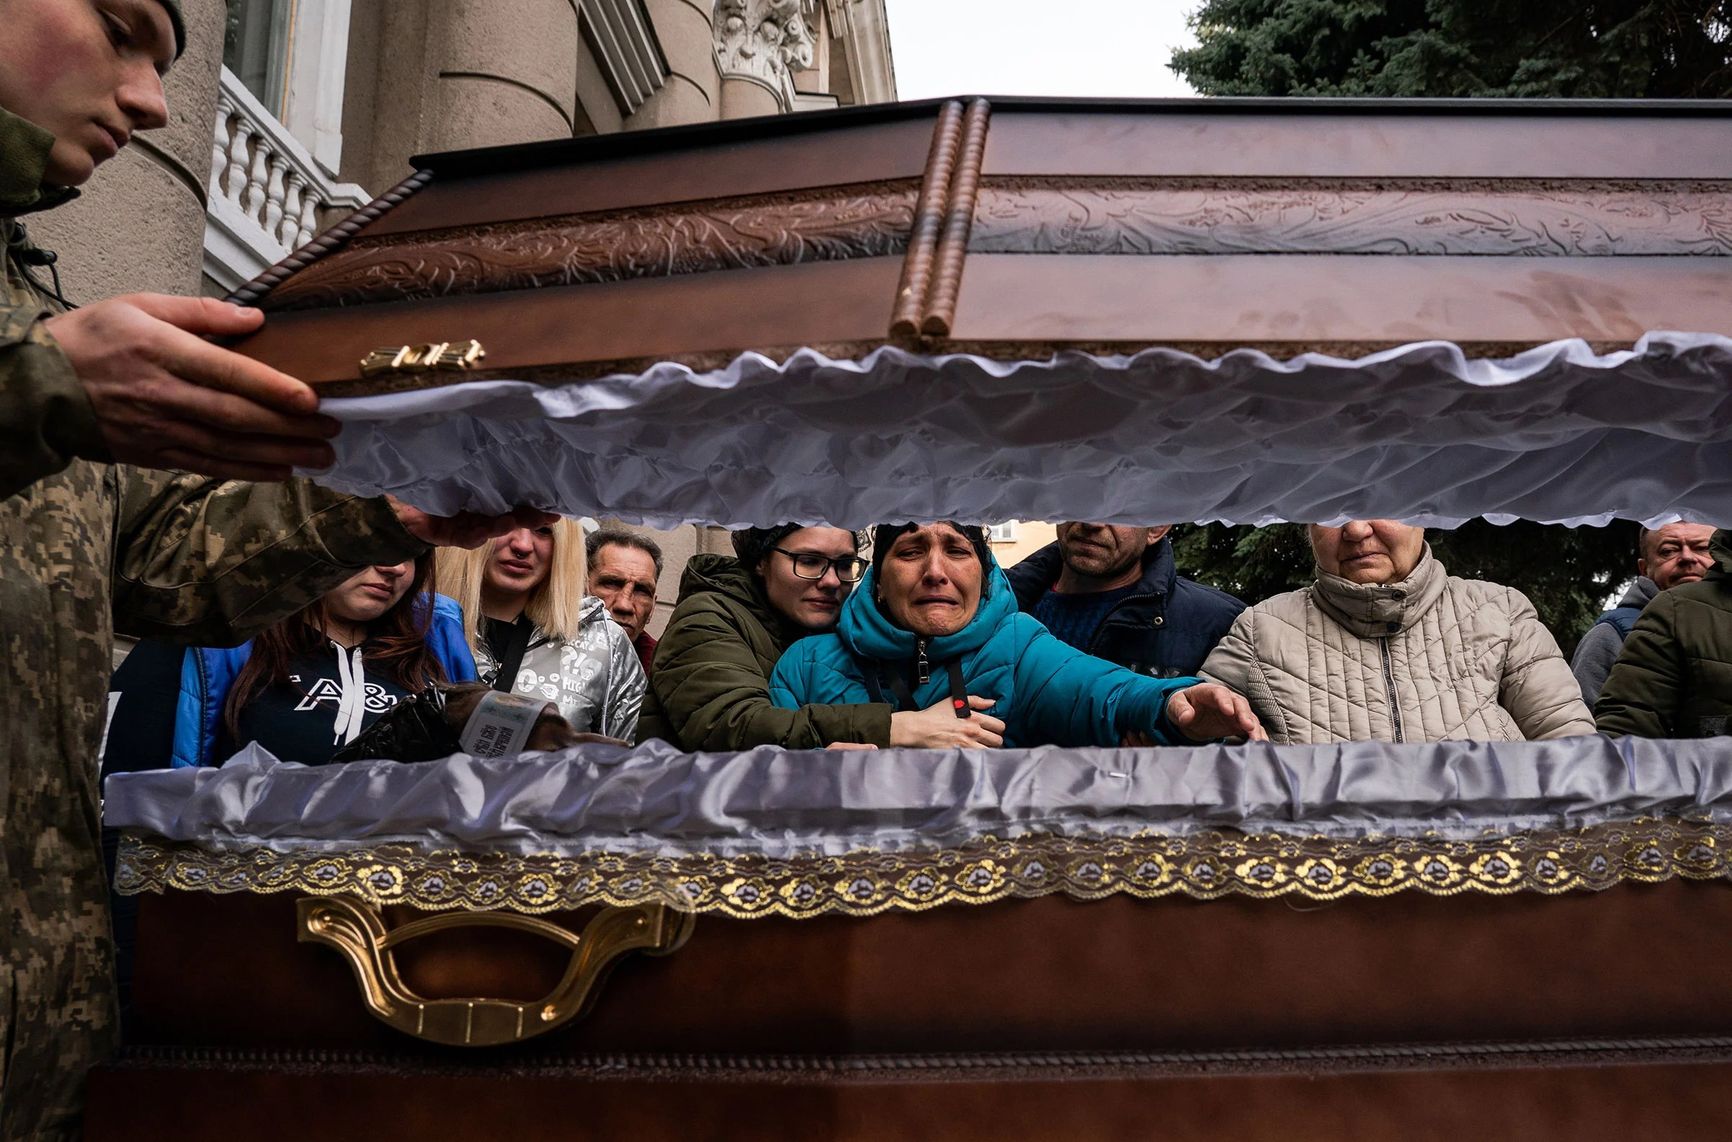 Family of Ukrainian soldier Ivan Lipskiy grieve at his casket during a military service of 5 Ukrainian soldiers in Odessa, Ukraine, on March 29. Lipskiy was killed on March 18 during a Russian airstrike that hit the 36th Ukrainian Naval Infantry Brigade killing more than 40 Ukrainian soldiers in the city of Mykolaiv.